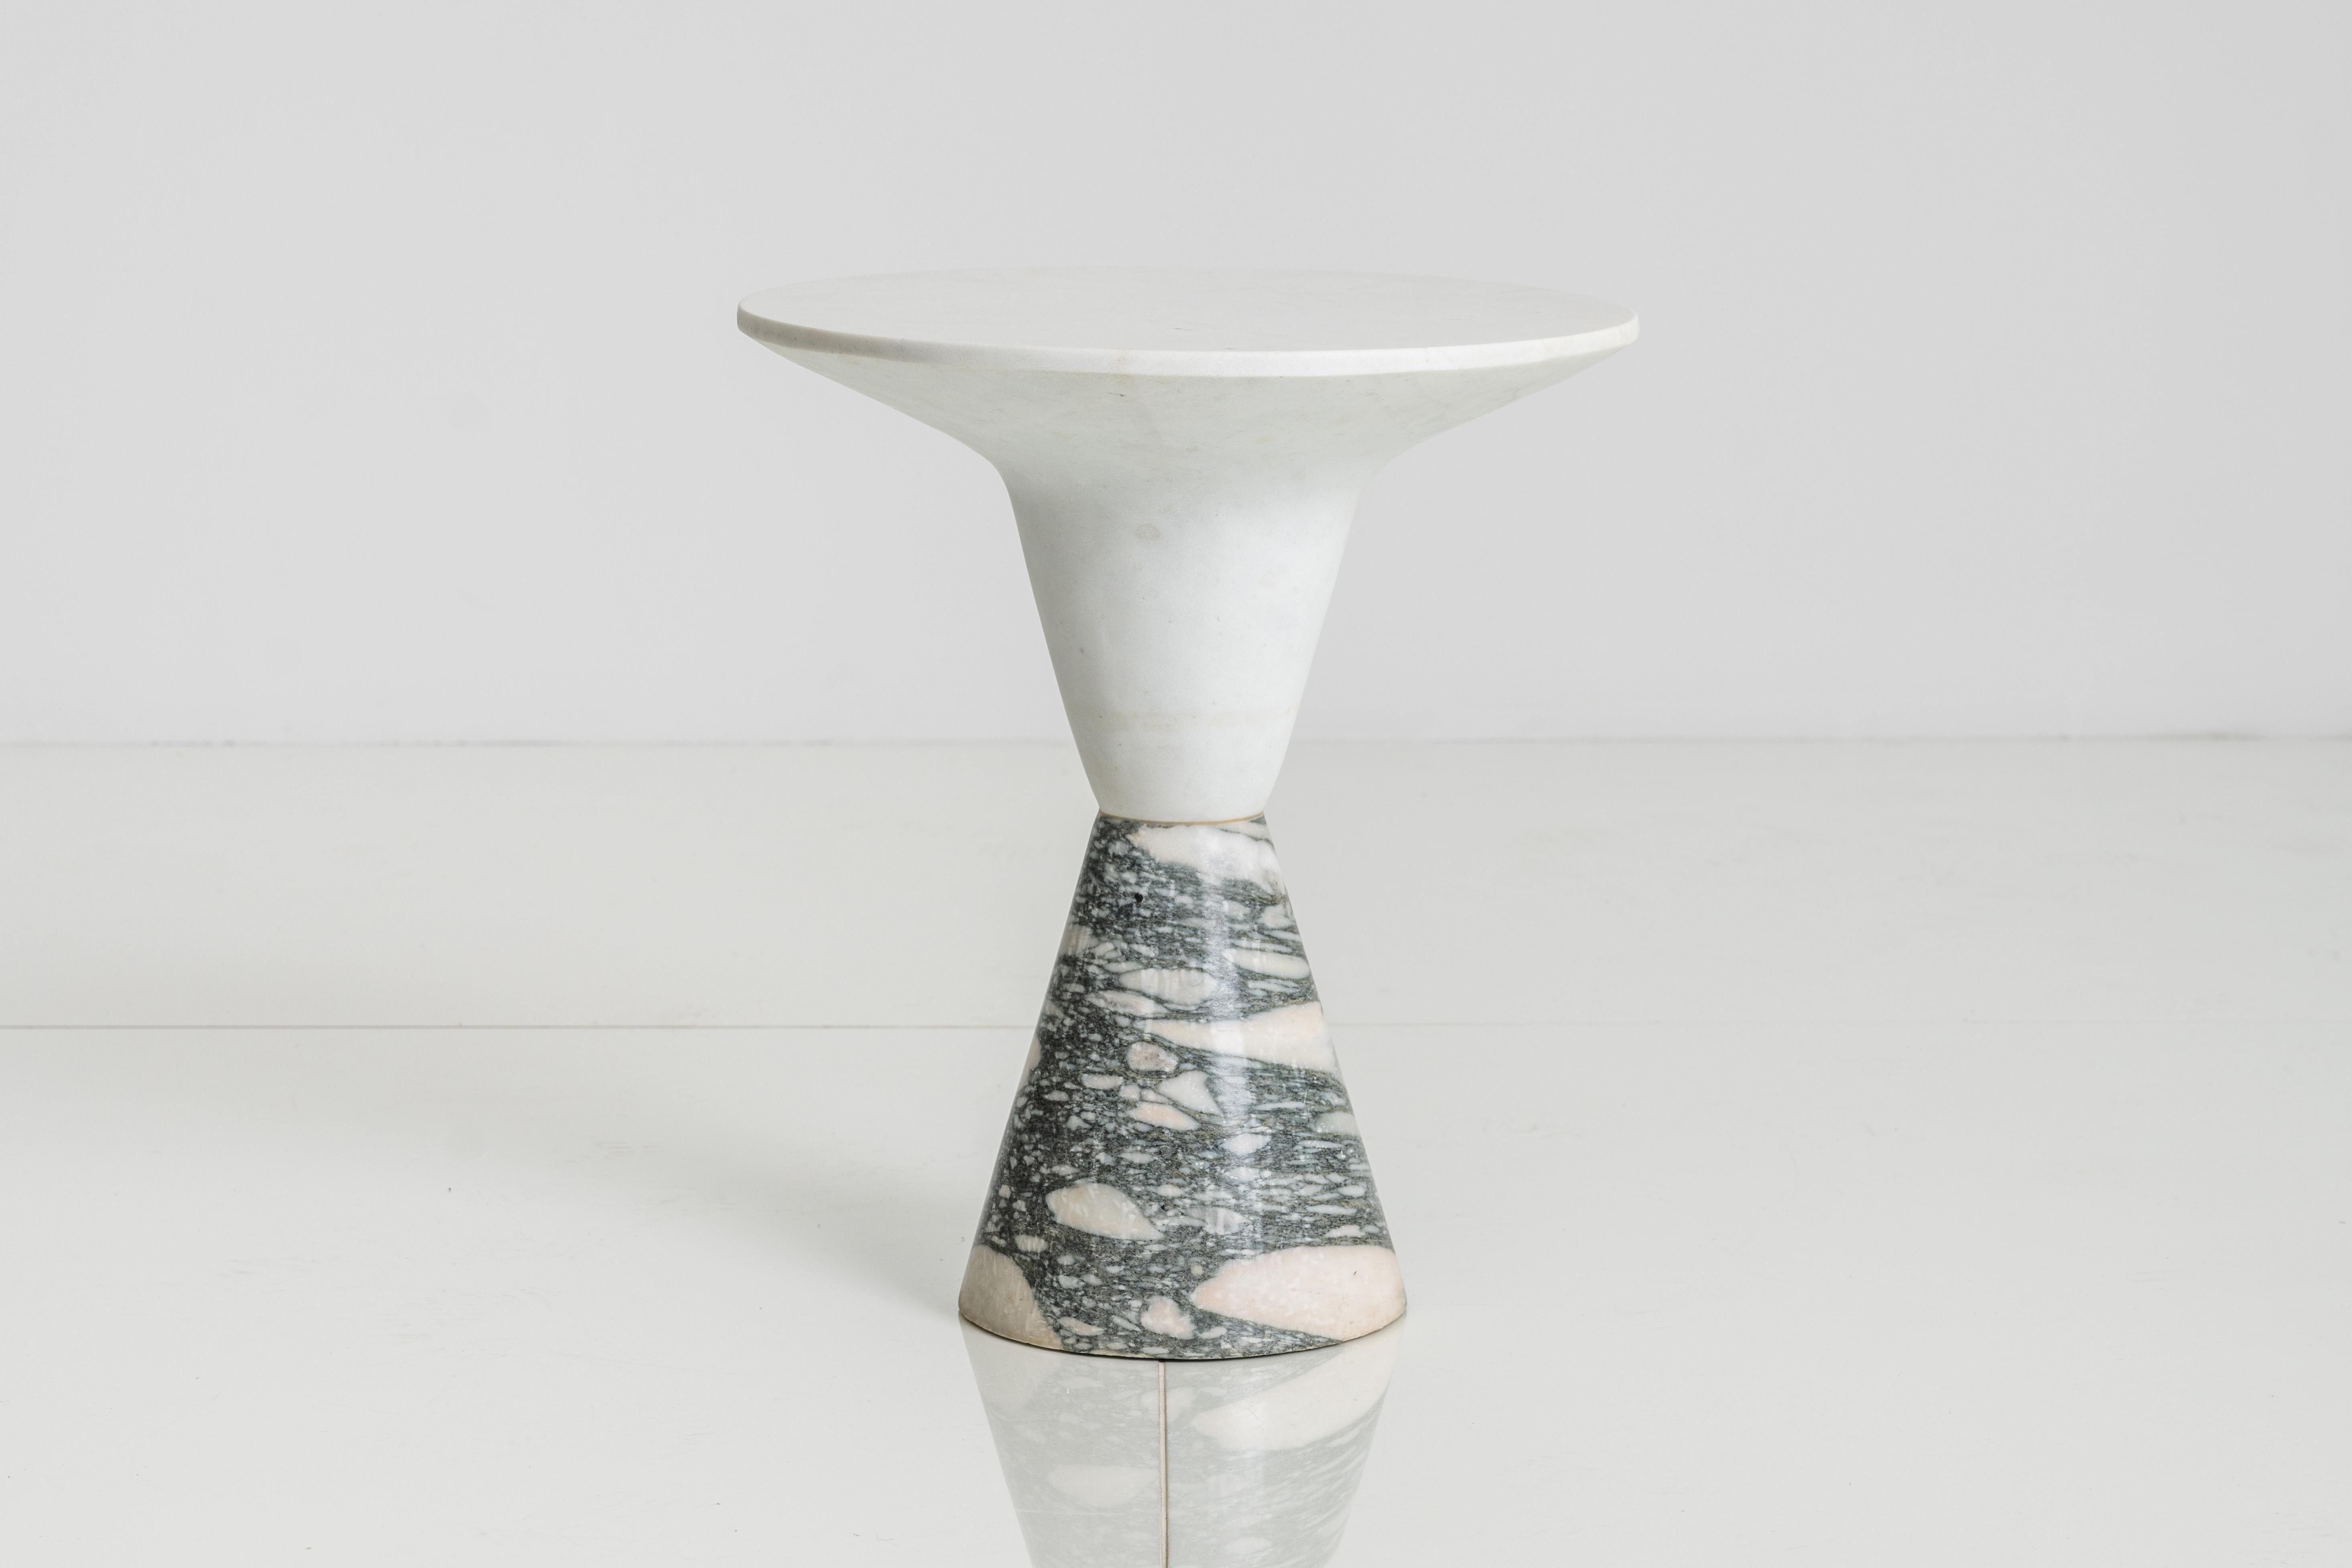 Two cone-shaped cylinders of solid marble join to form the DeMarco Side Table.

Ø 18